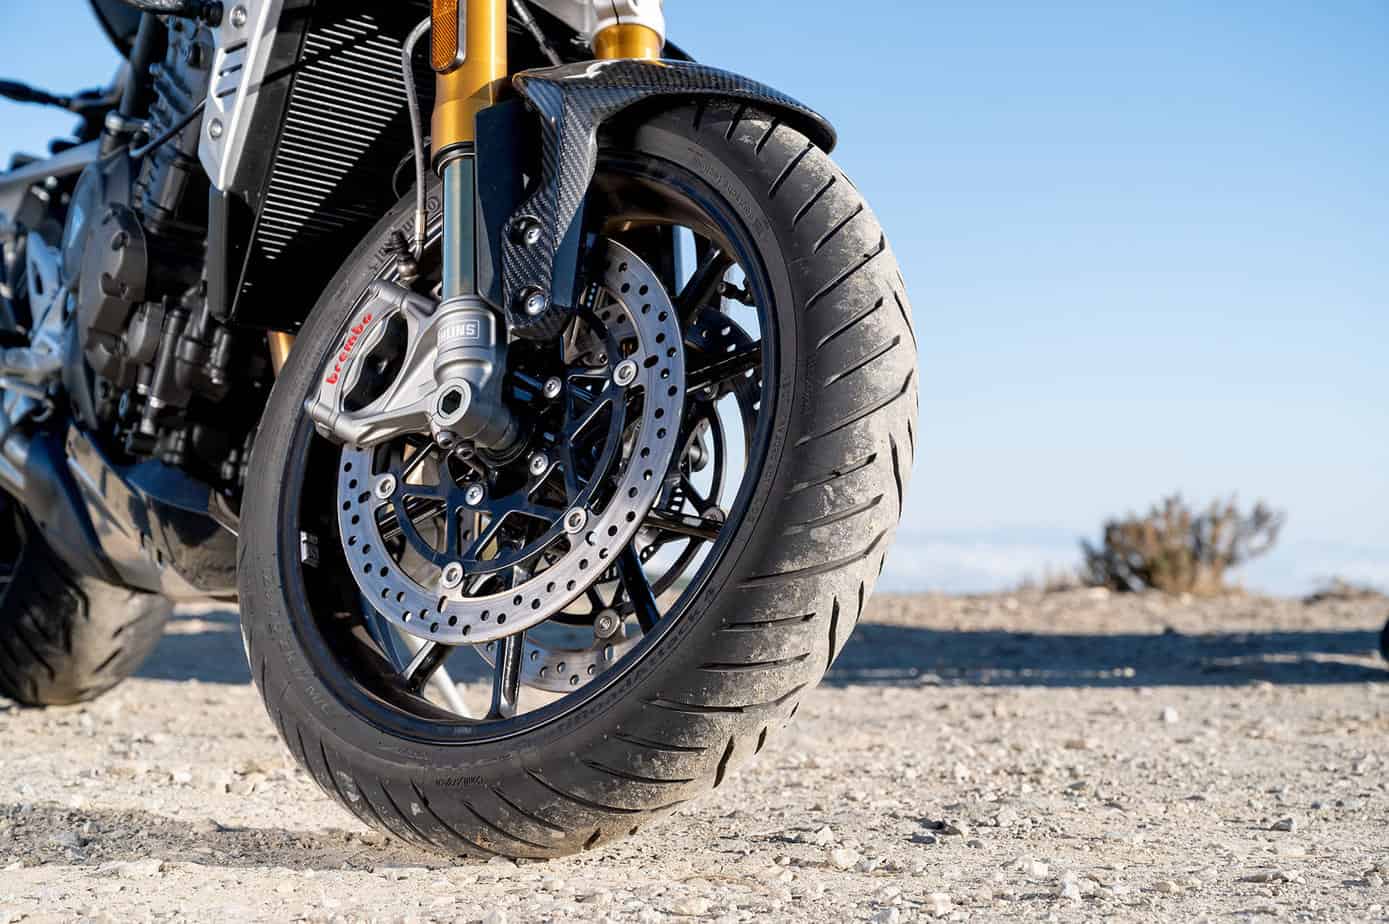 How Much Does a Motorcycle Tire Weigh